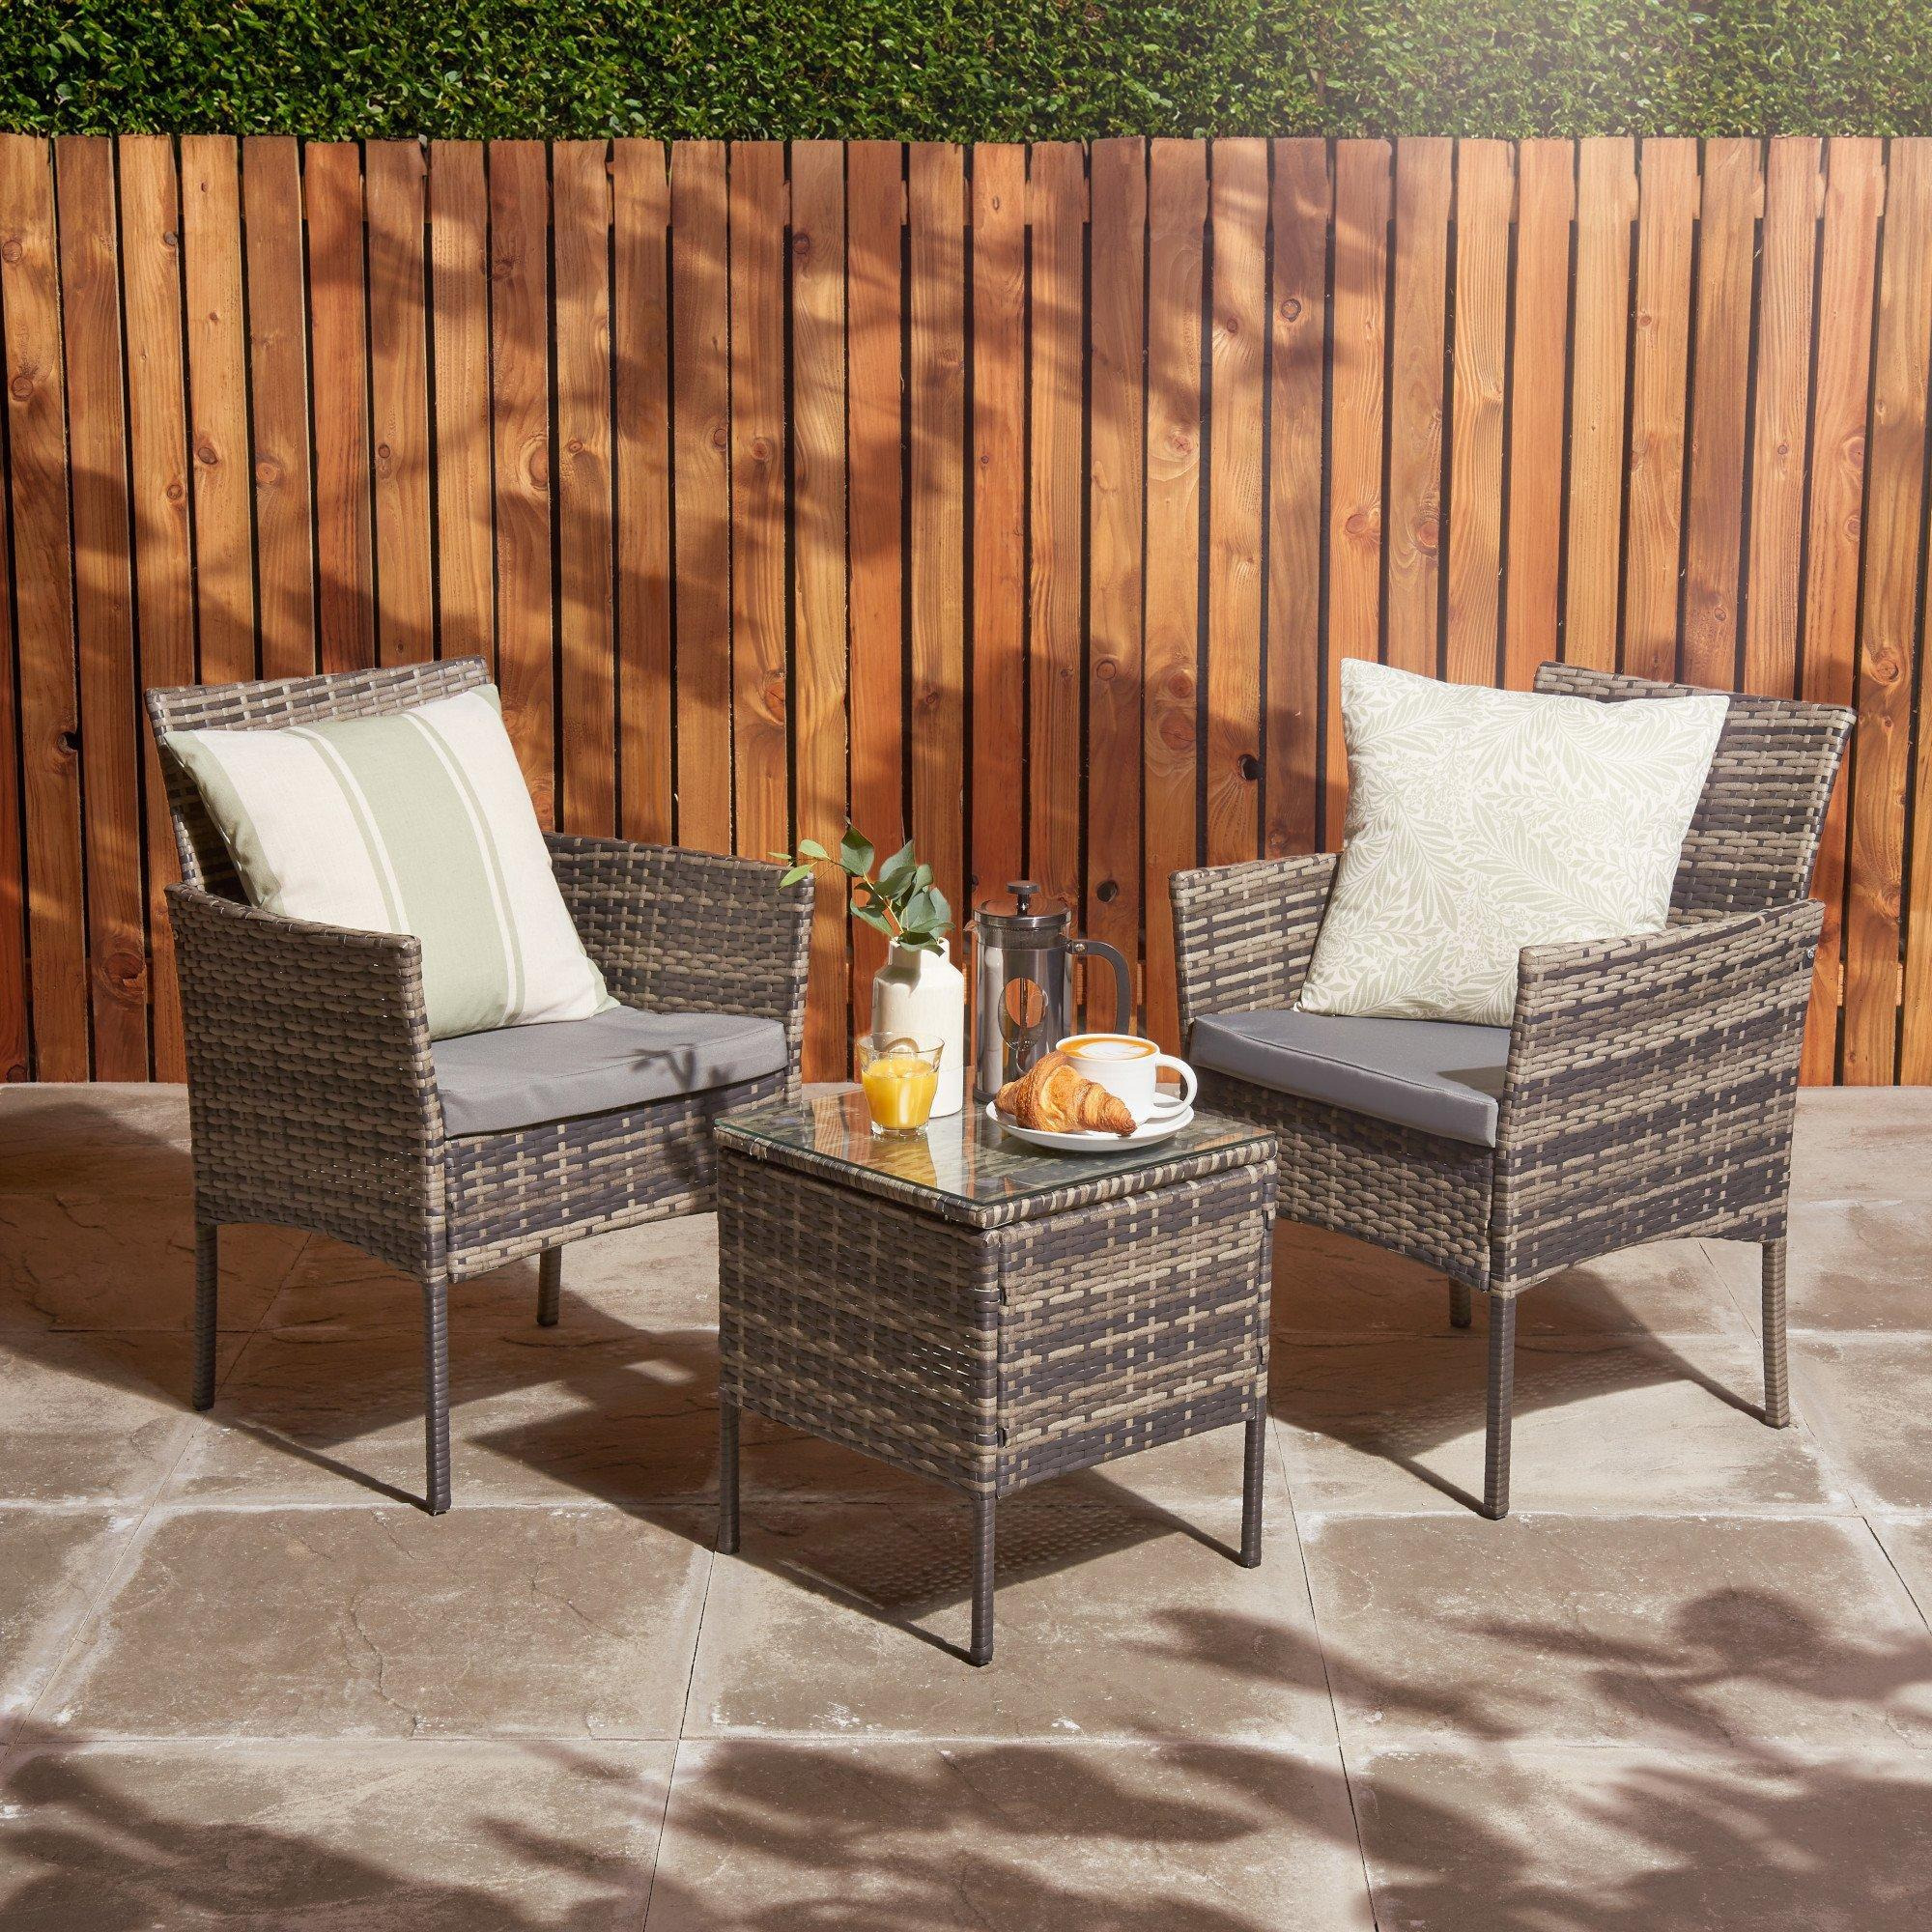 Garden Bistro Set 2 Seater Rattan Table & Chairs - image 1